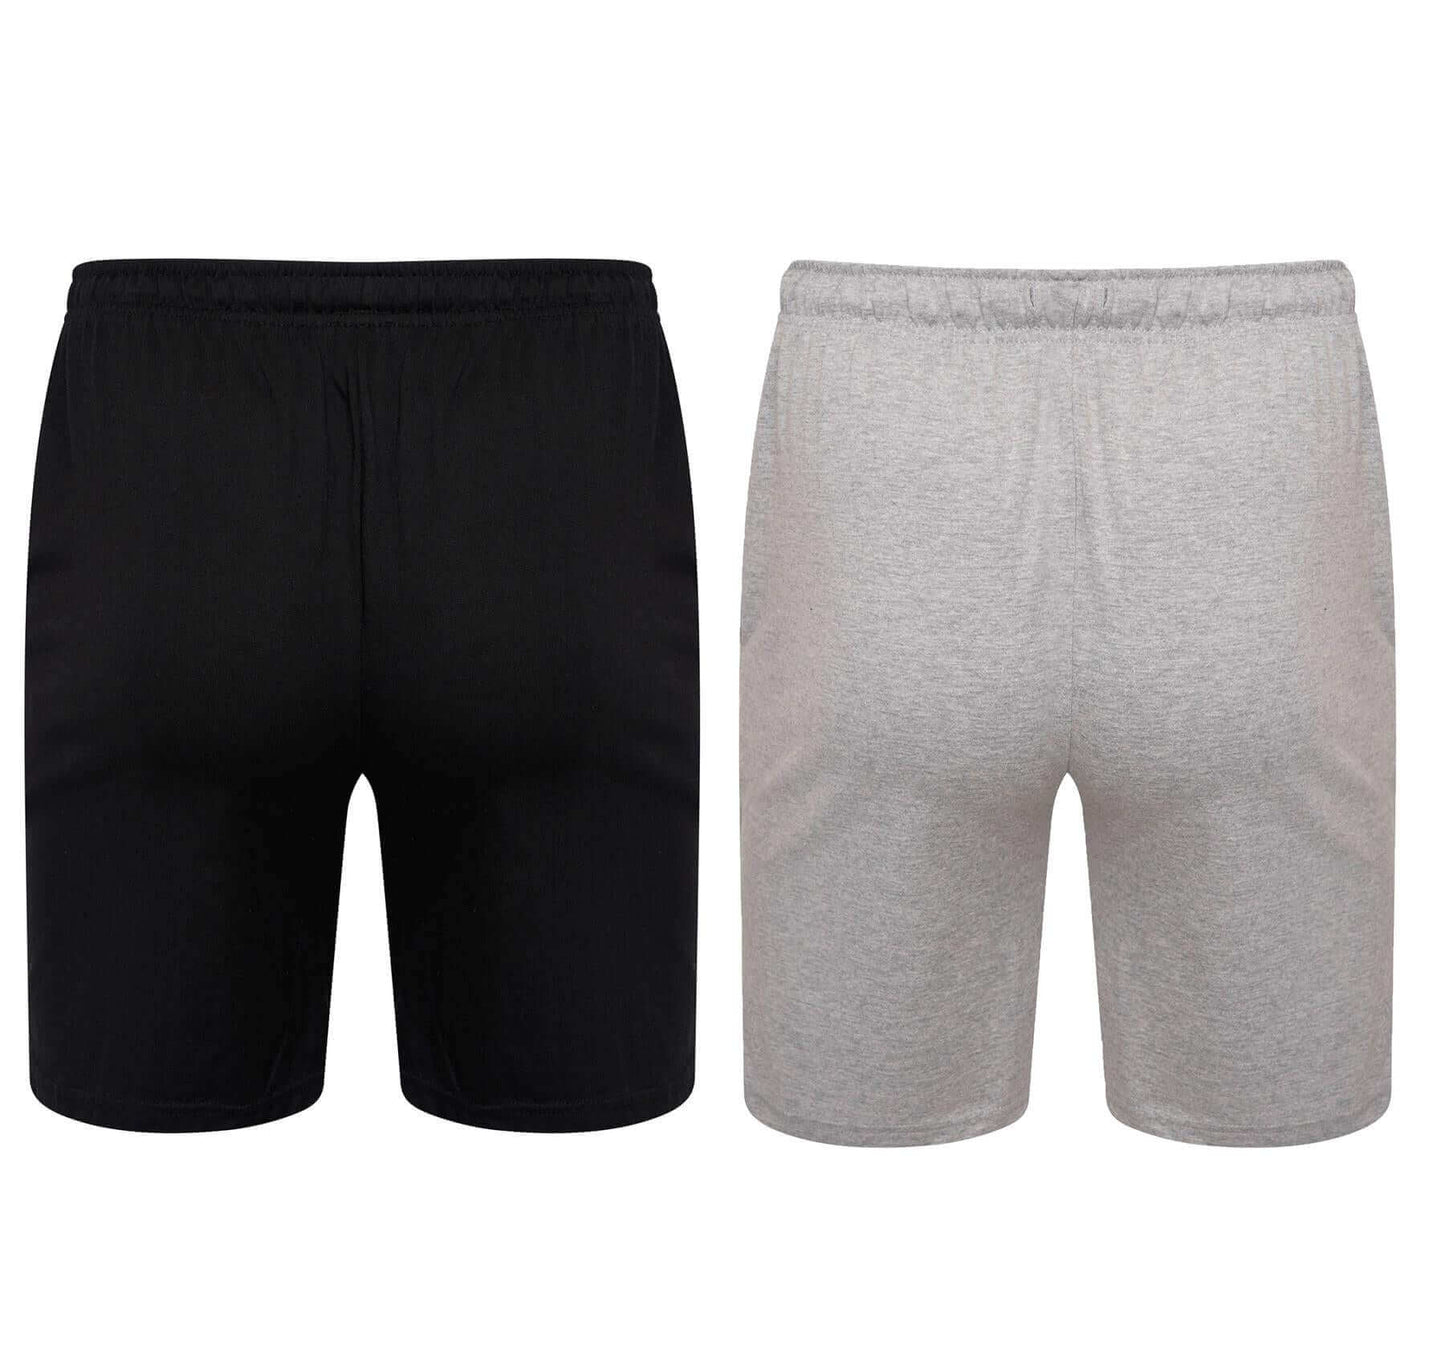 Pack of 2 Men's Shorts Pyjama Bottoms Organic Cotton Loungewear. Buy now for £10.00. A Lounge Short by Sock Stack. 3x large, 4x large, 5x large, assorted, athletics, black, bottom, boys, comfortable, cotton, grey, jersey, large, loungewear, medium, mens,